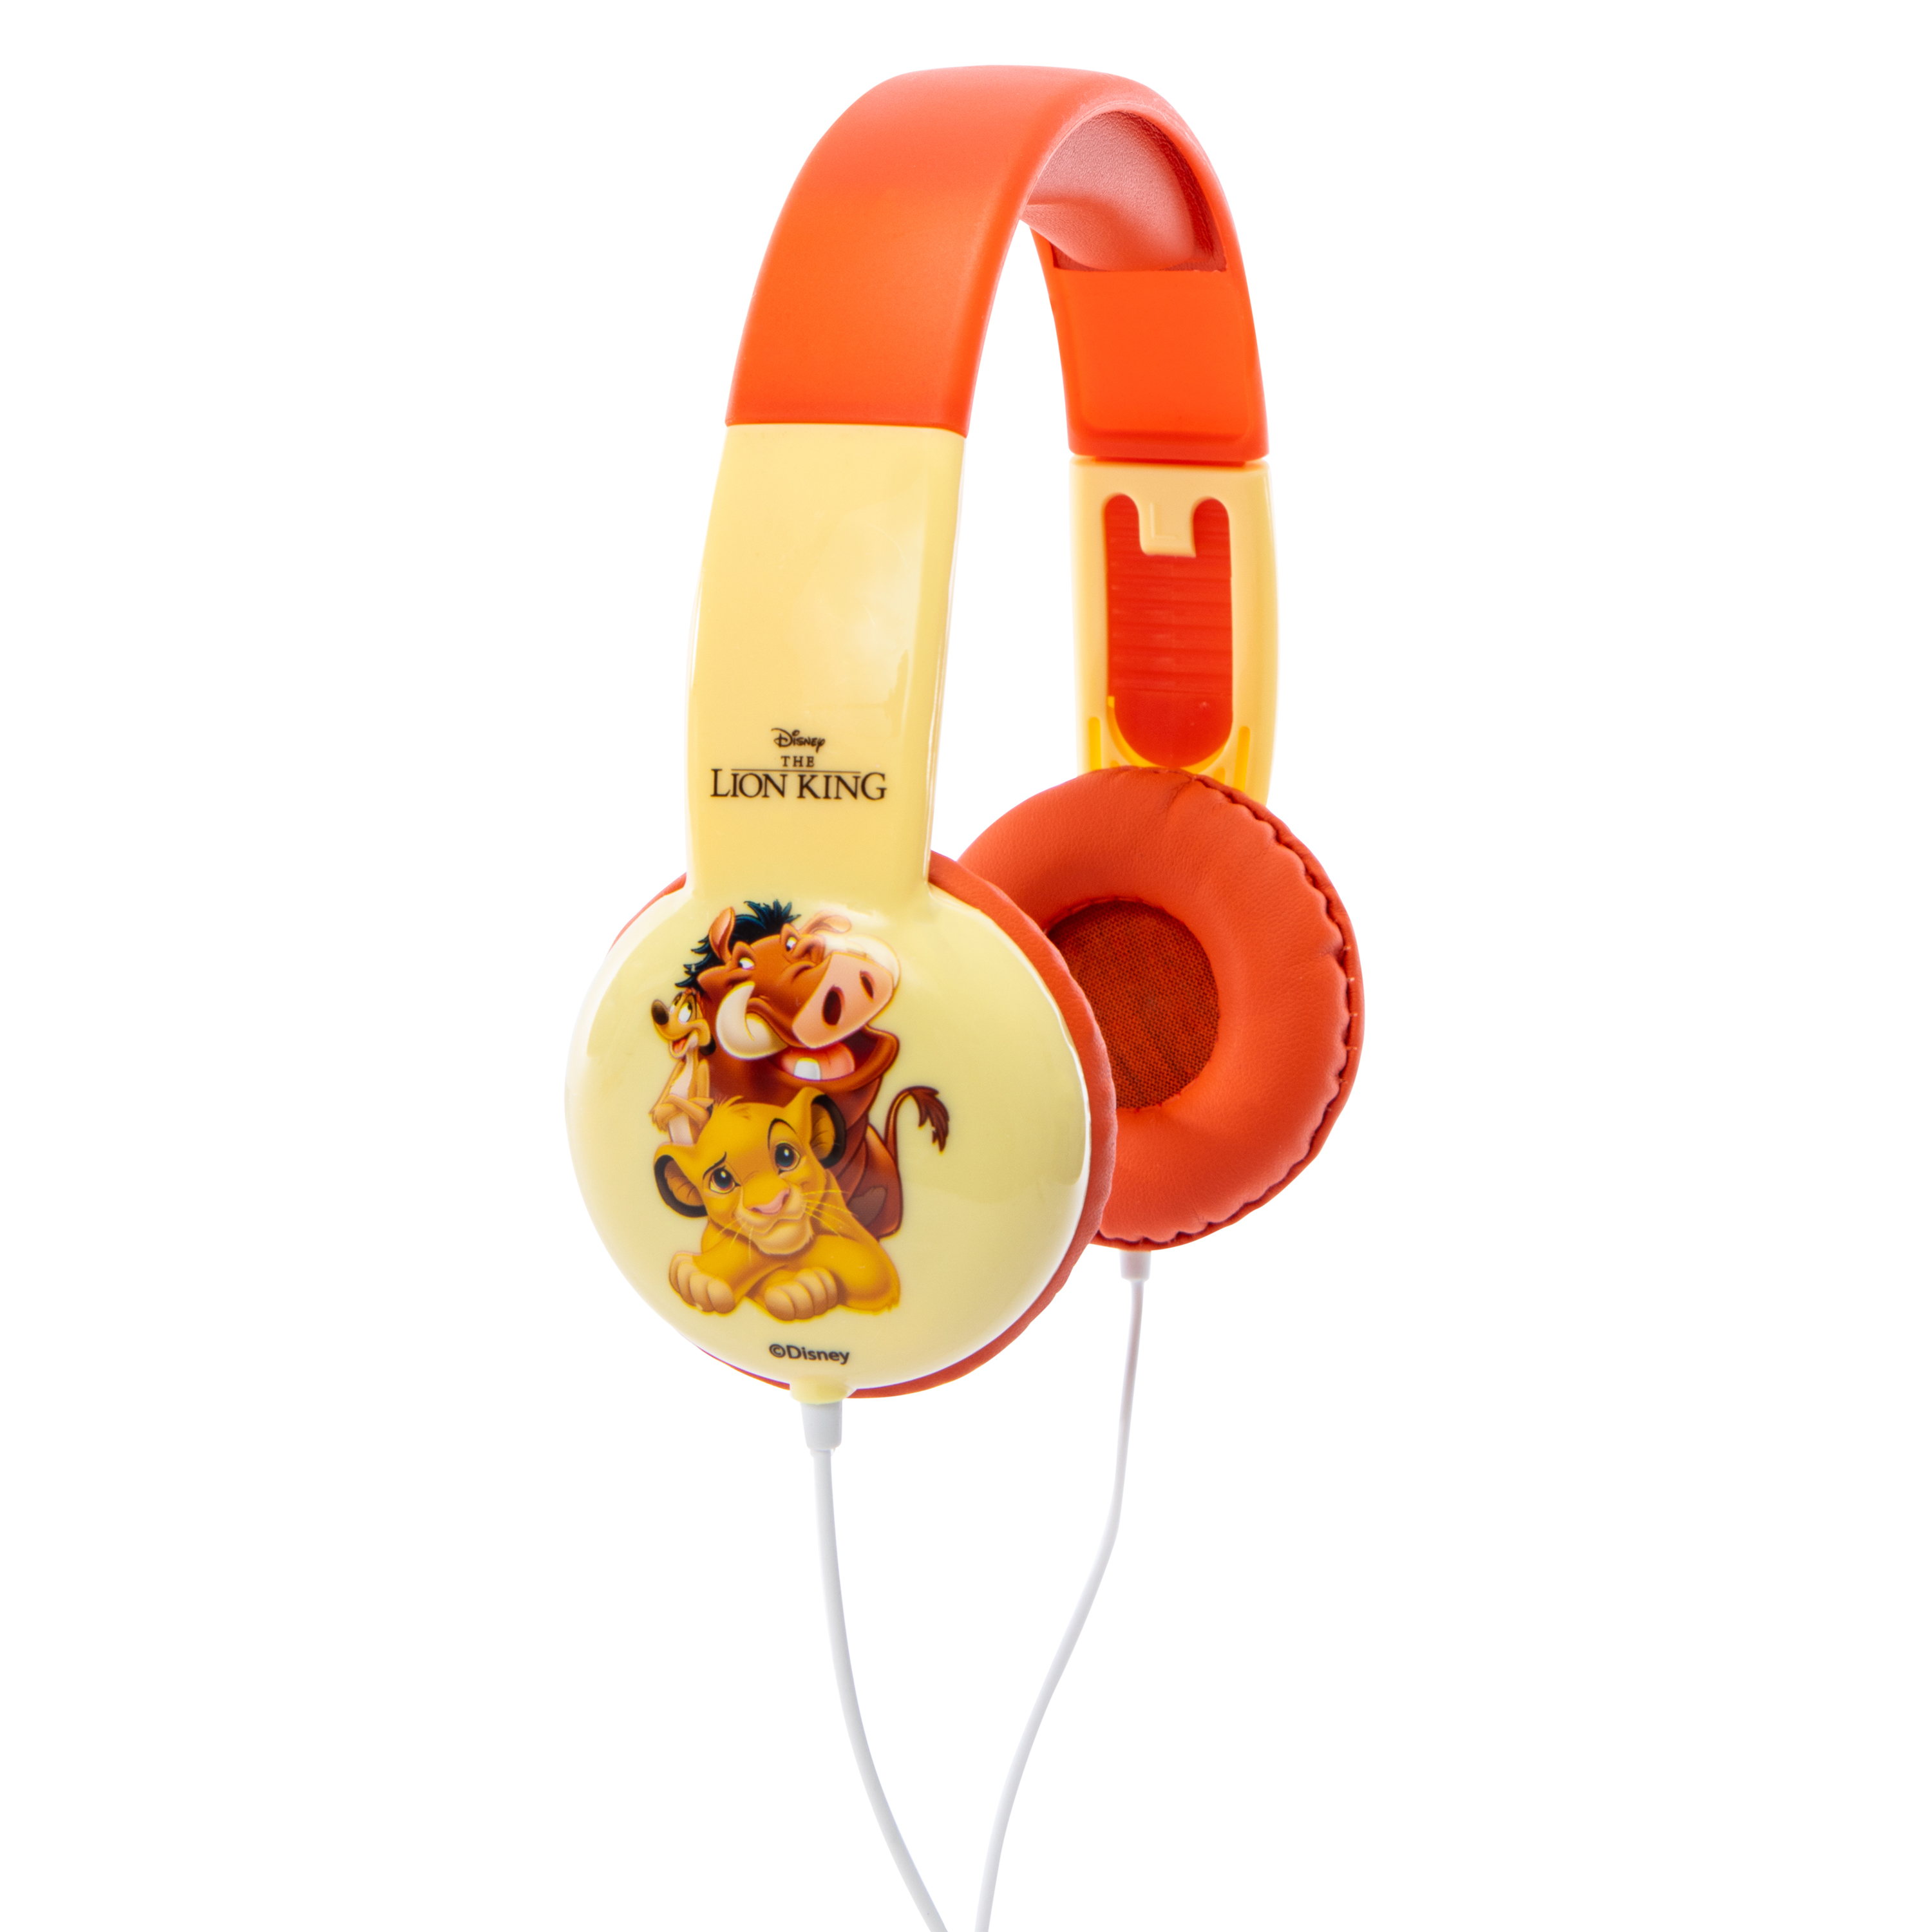 Disney Classics Lion King Kid-Safe Wired Headphones With Mic